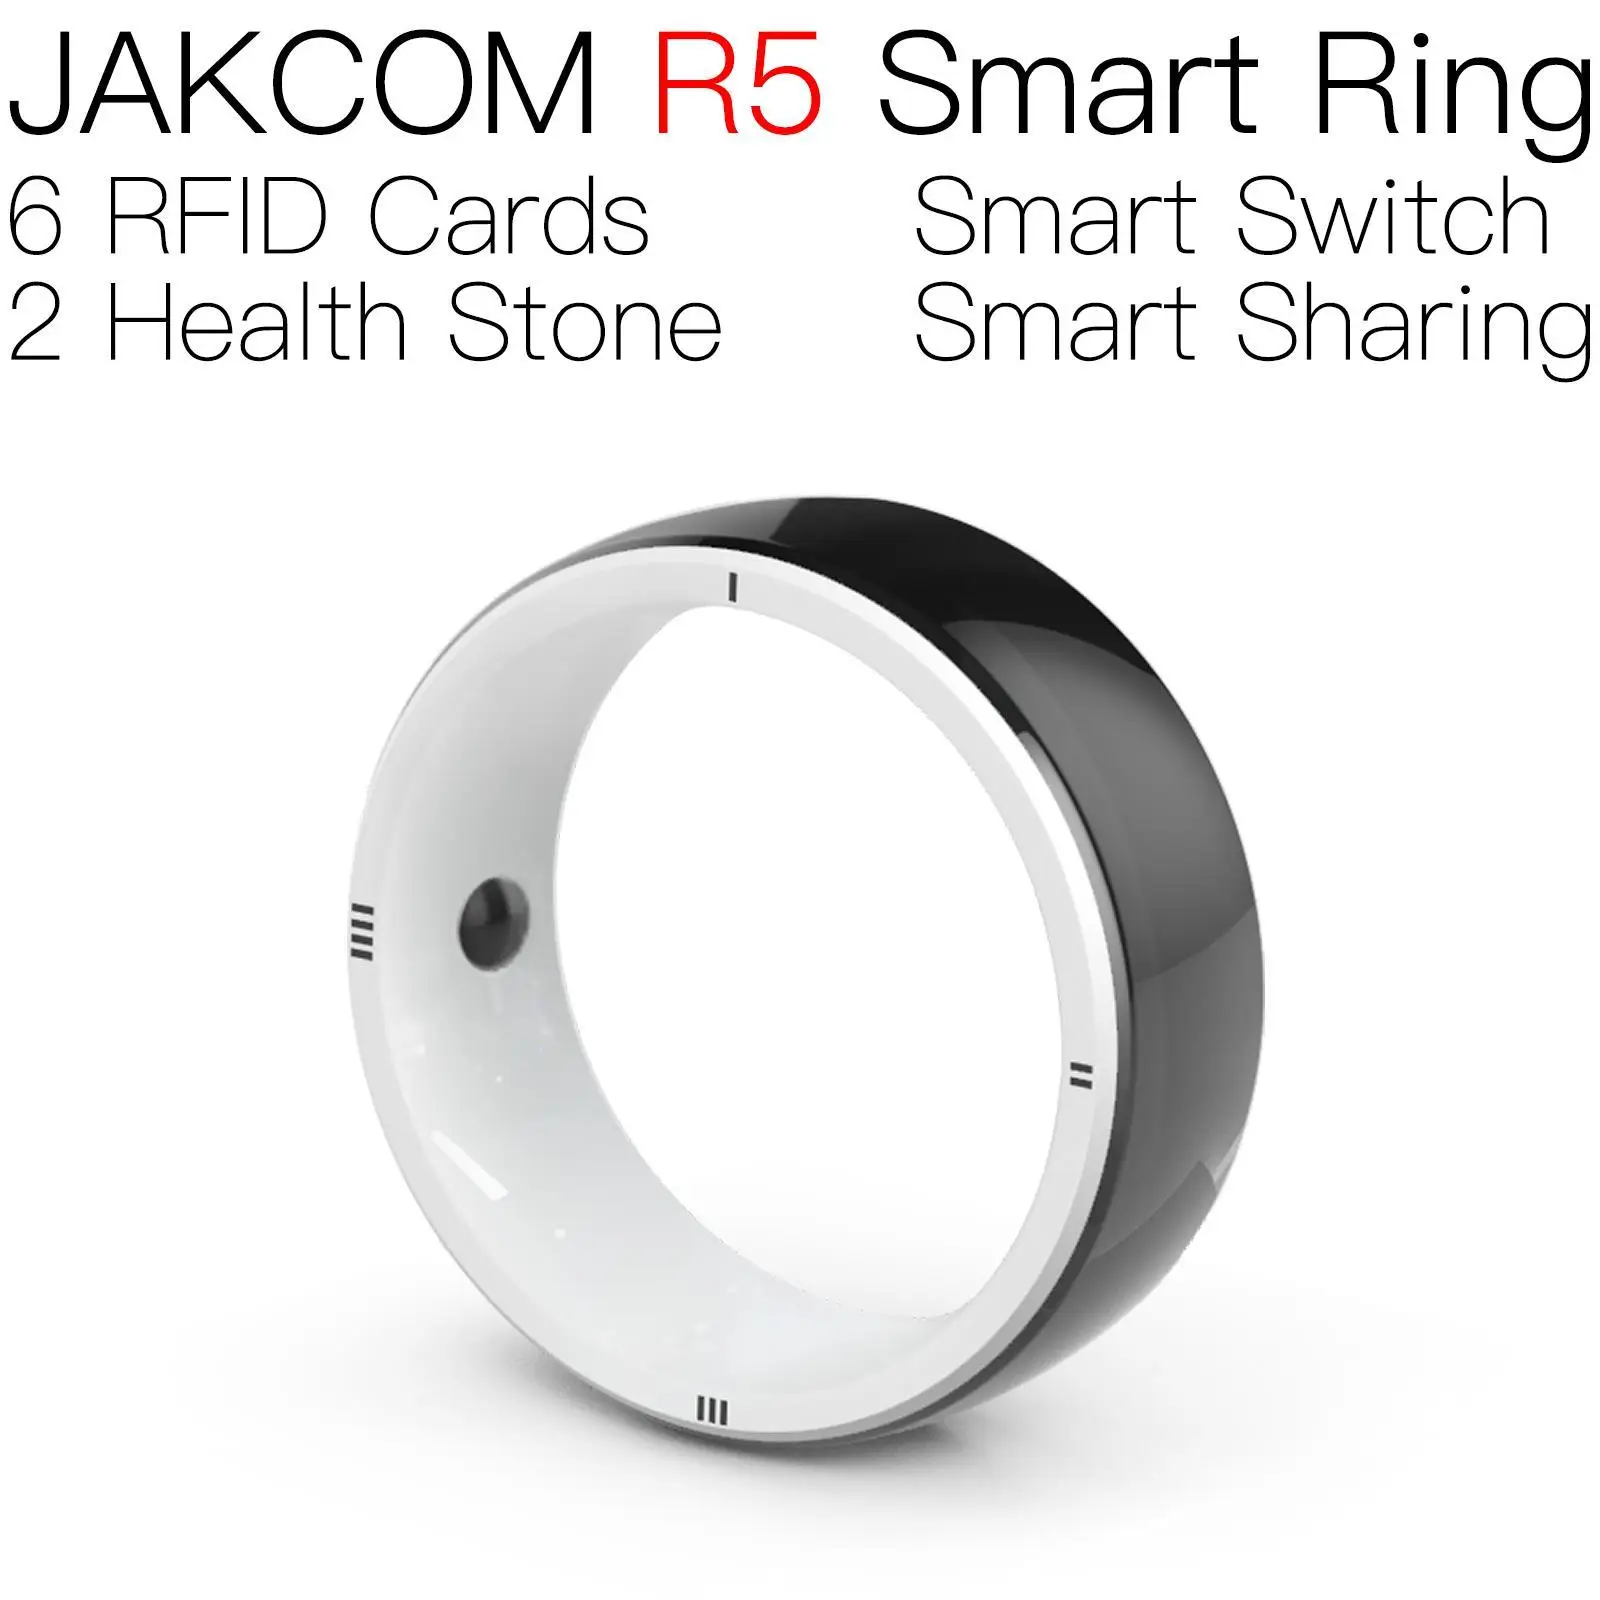 

JAKCOM R5 Smart Ring better than amiboo serie 5 rfid writerable card tray ts tag 125 id pet tags uhf copier autocollant